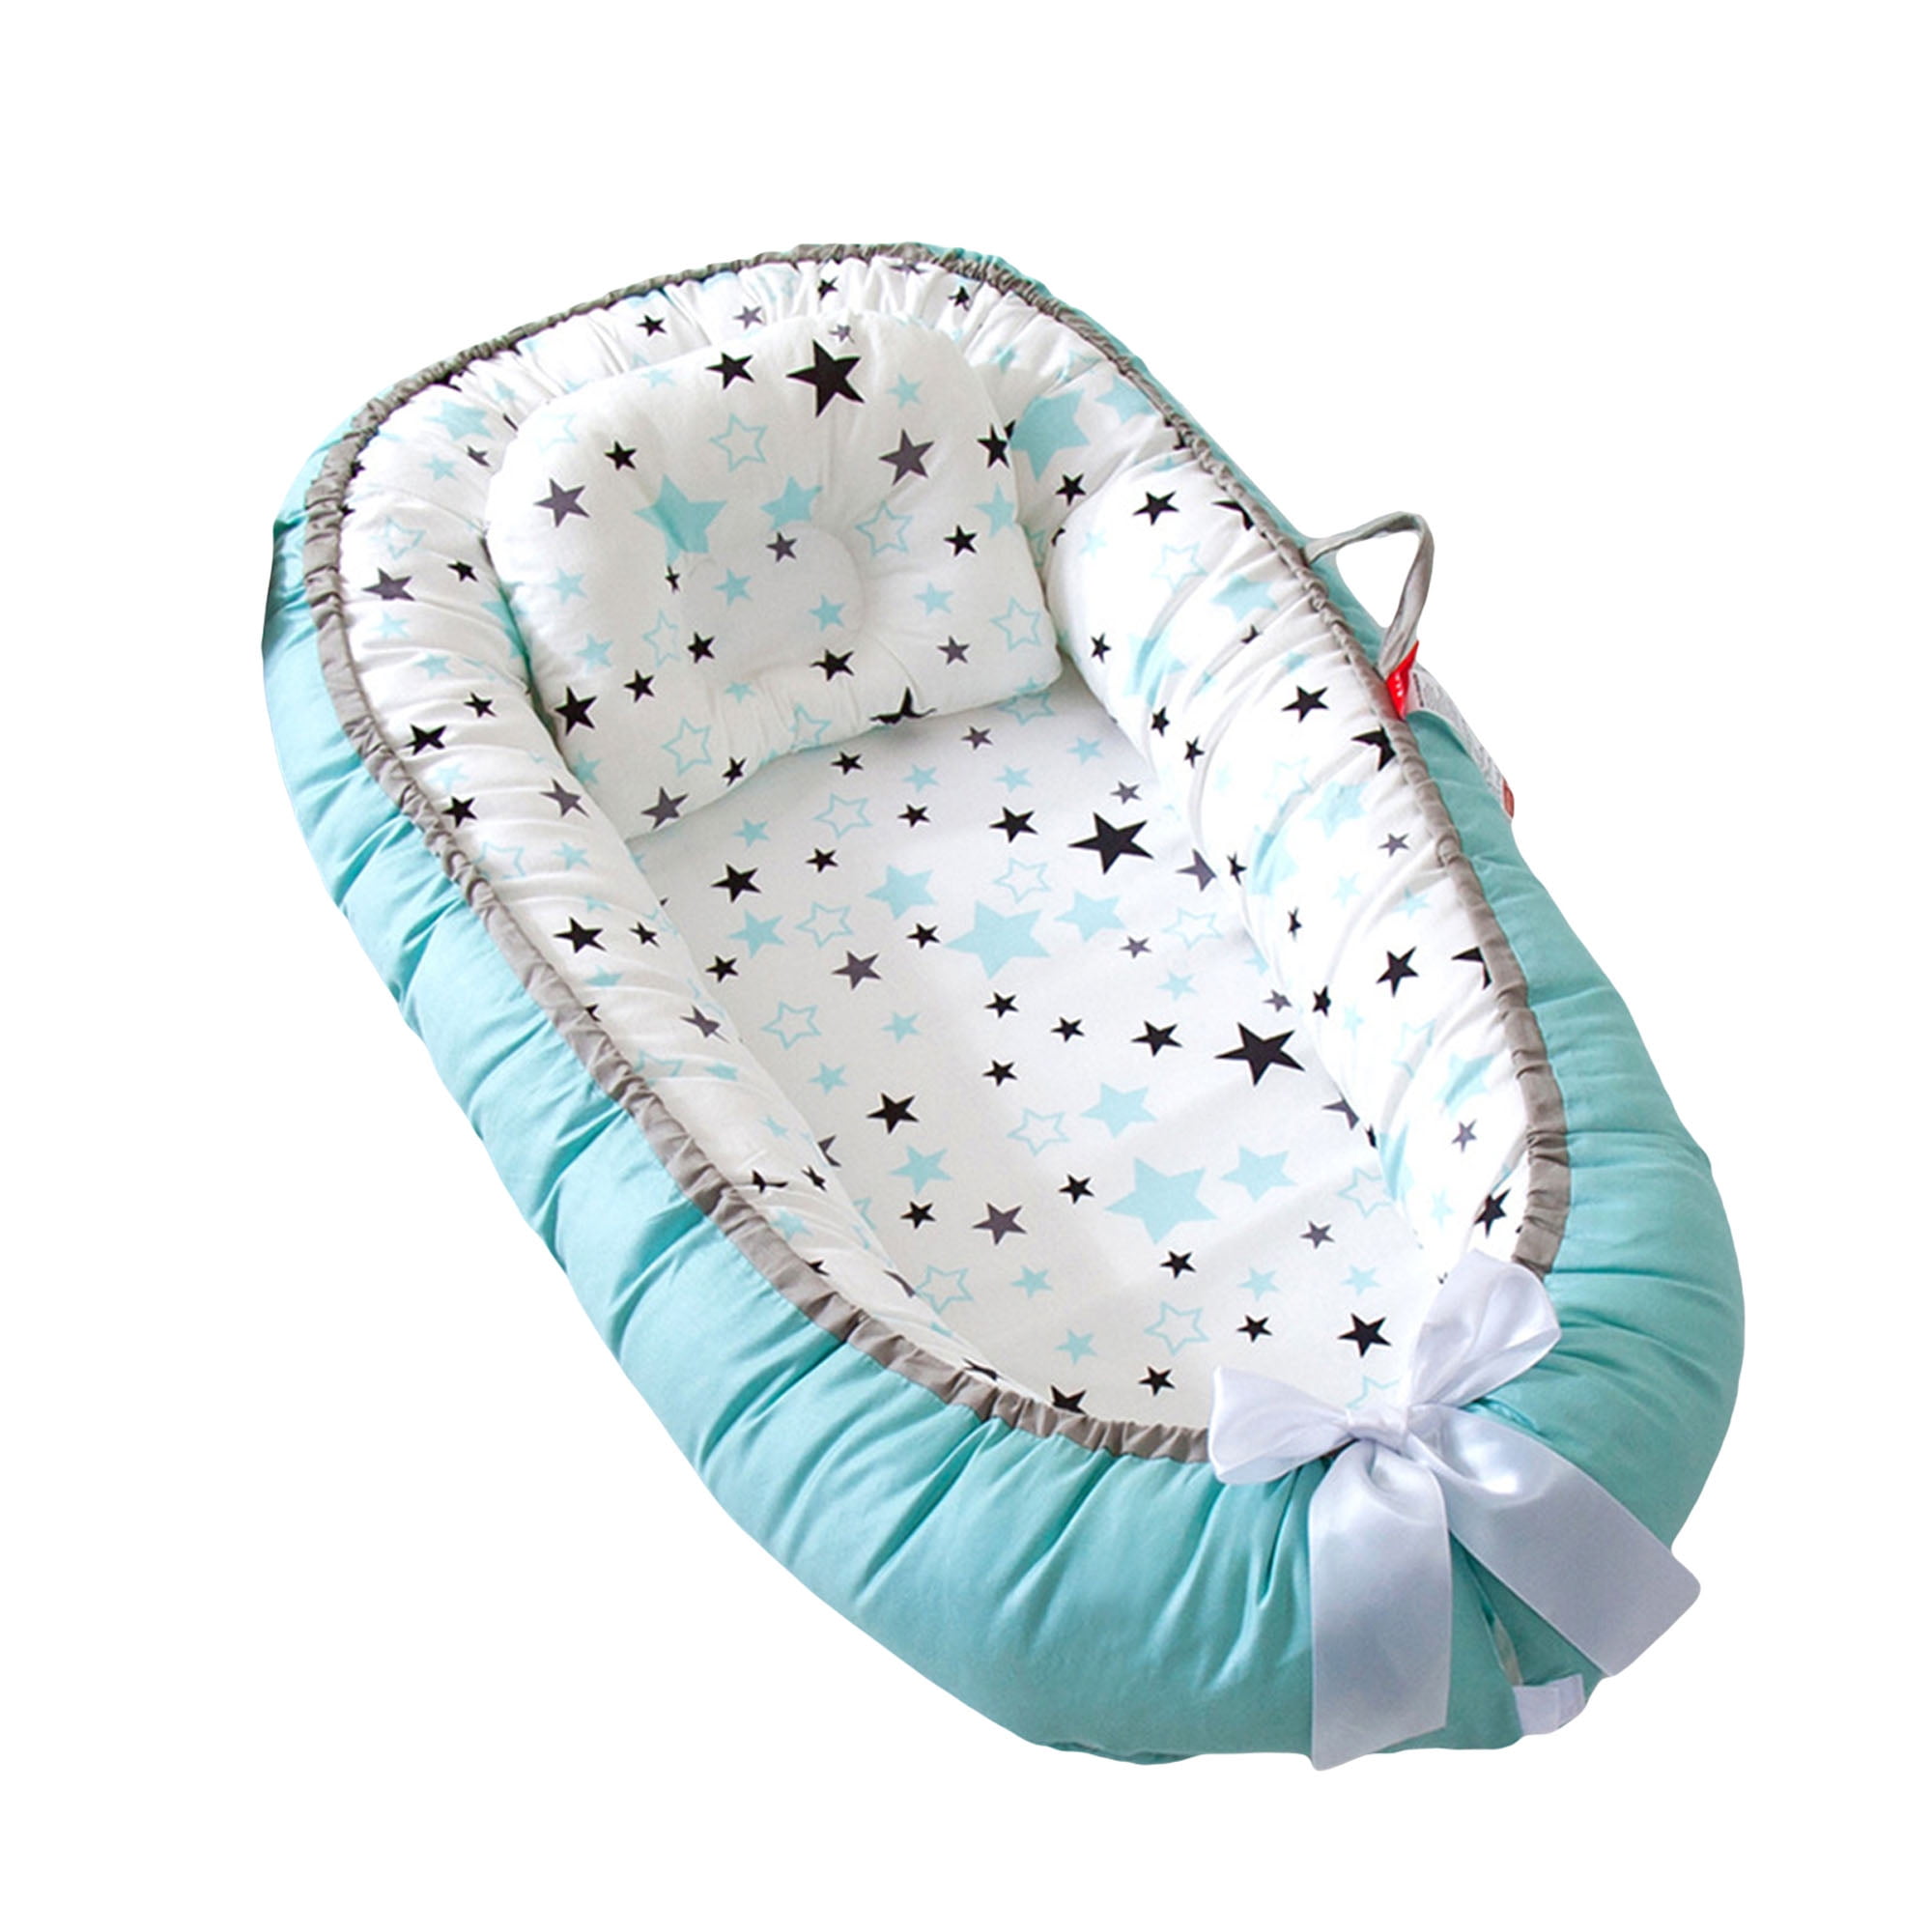 Portable Super Soft and Breathable Newborn Infant Bassinet Baby Lounger Removable Cover Newborn Cocoon Snuggle Bed 